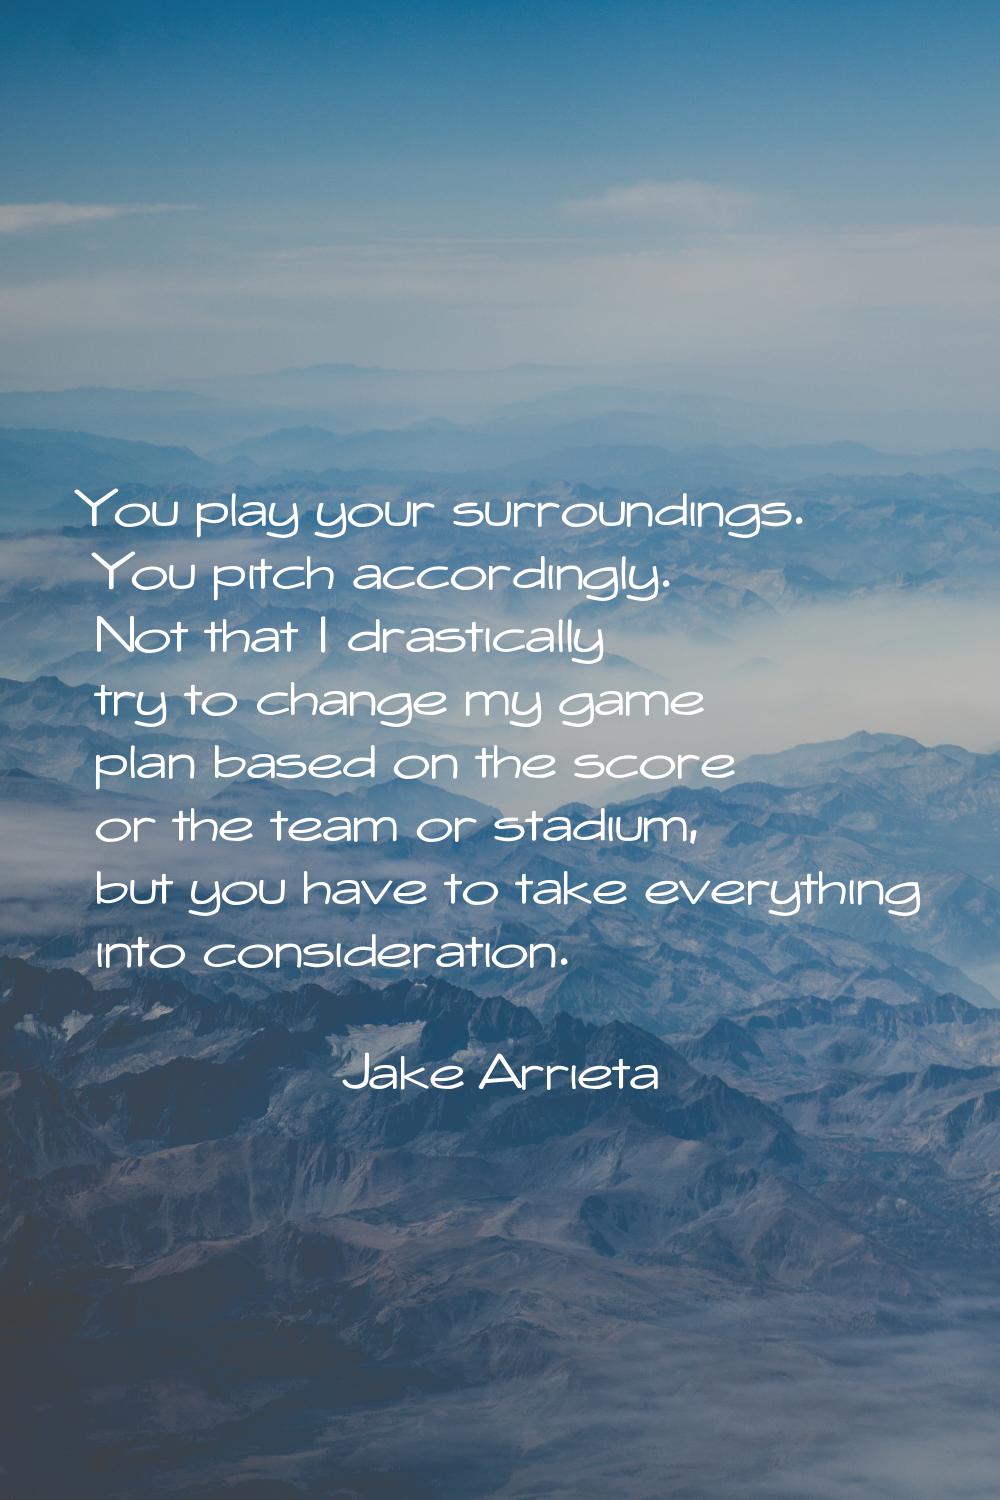 You play your surroundings. You pitch accordingly. Not that I drastically try to change my game pla